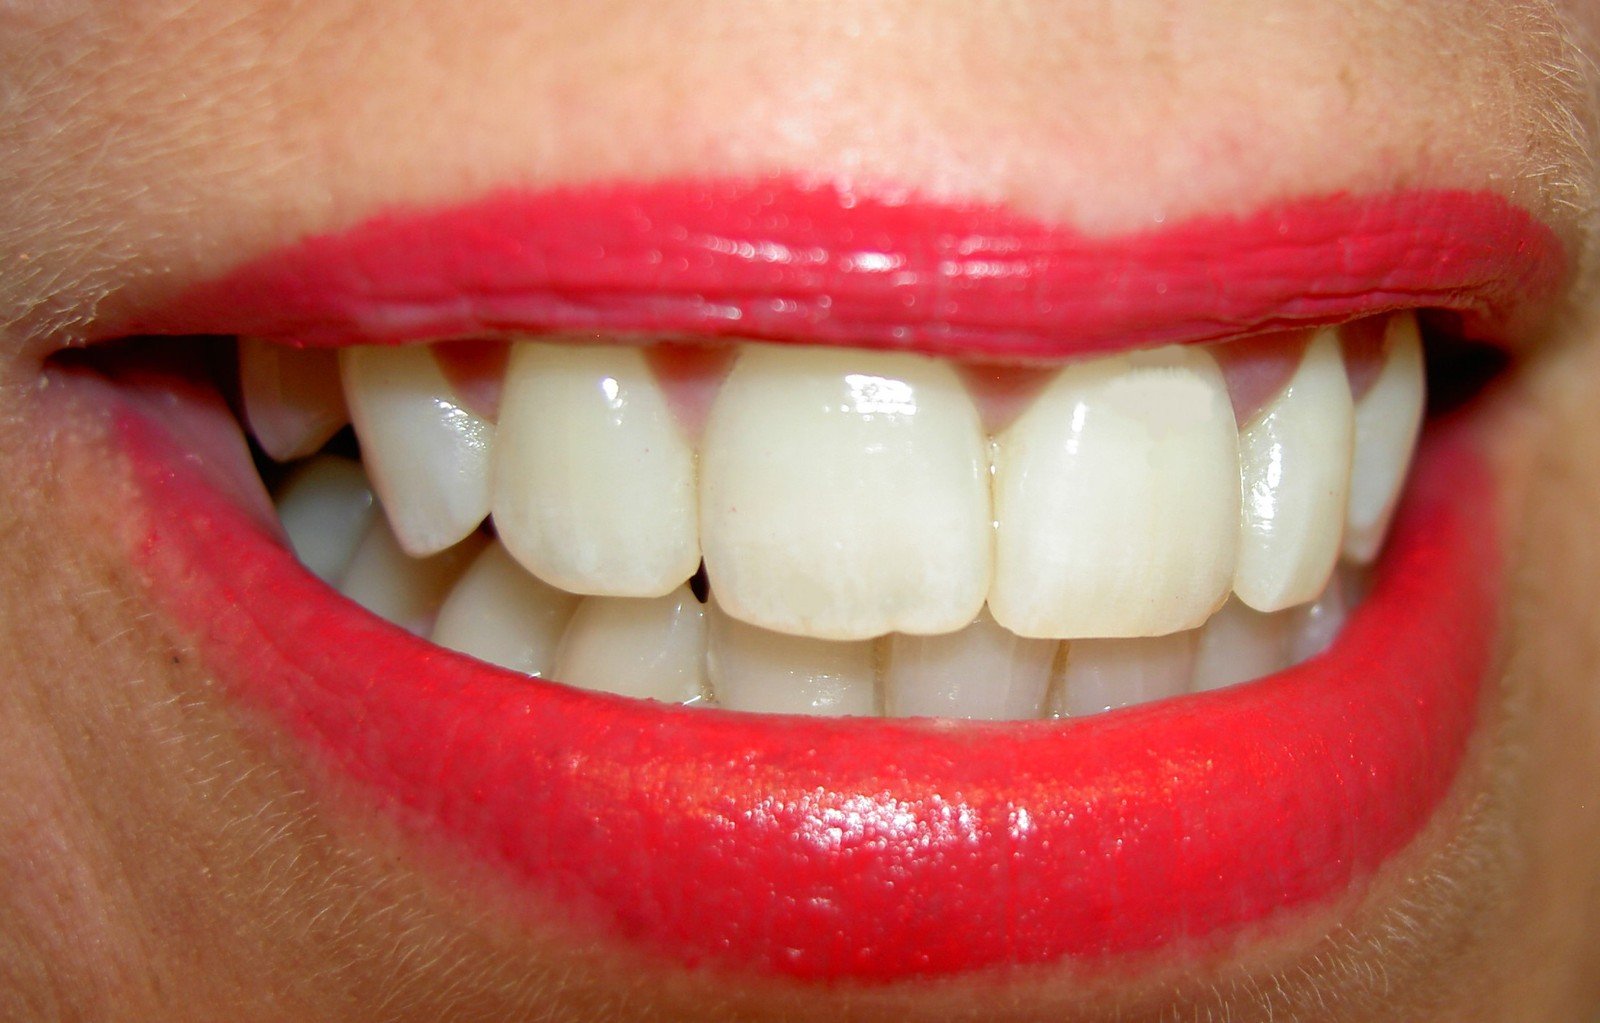 a close up of a person's mouth, with bright red lipstick on the lips